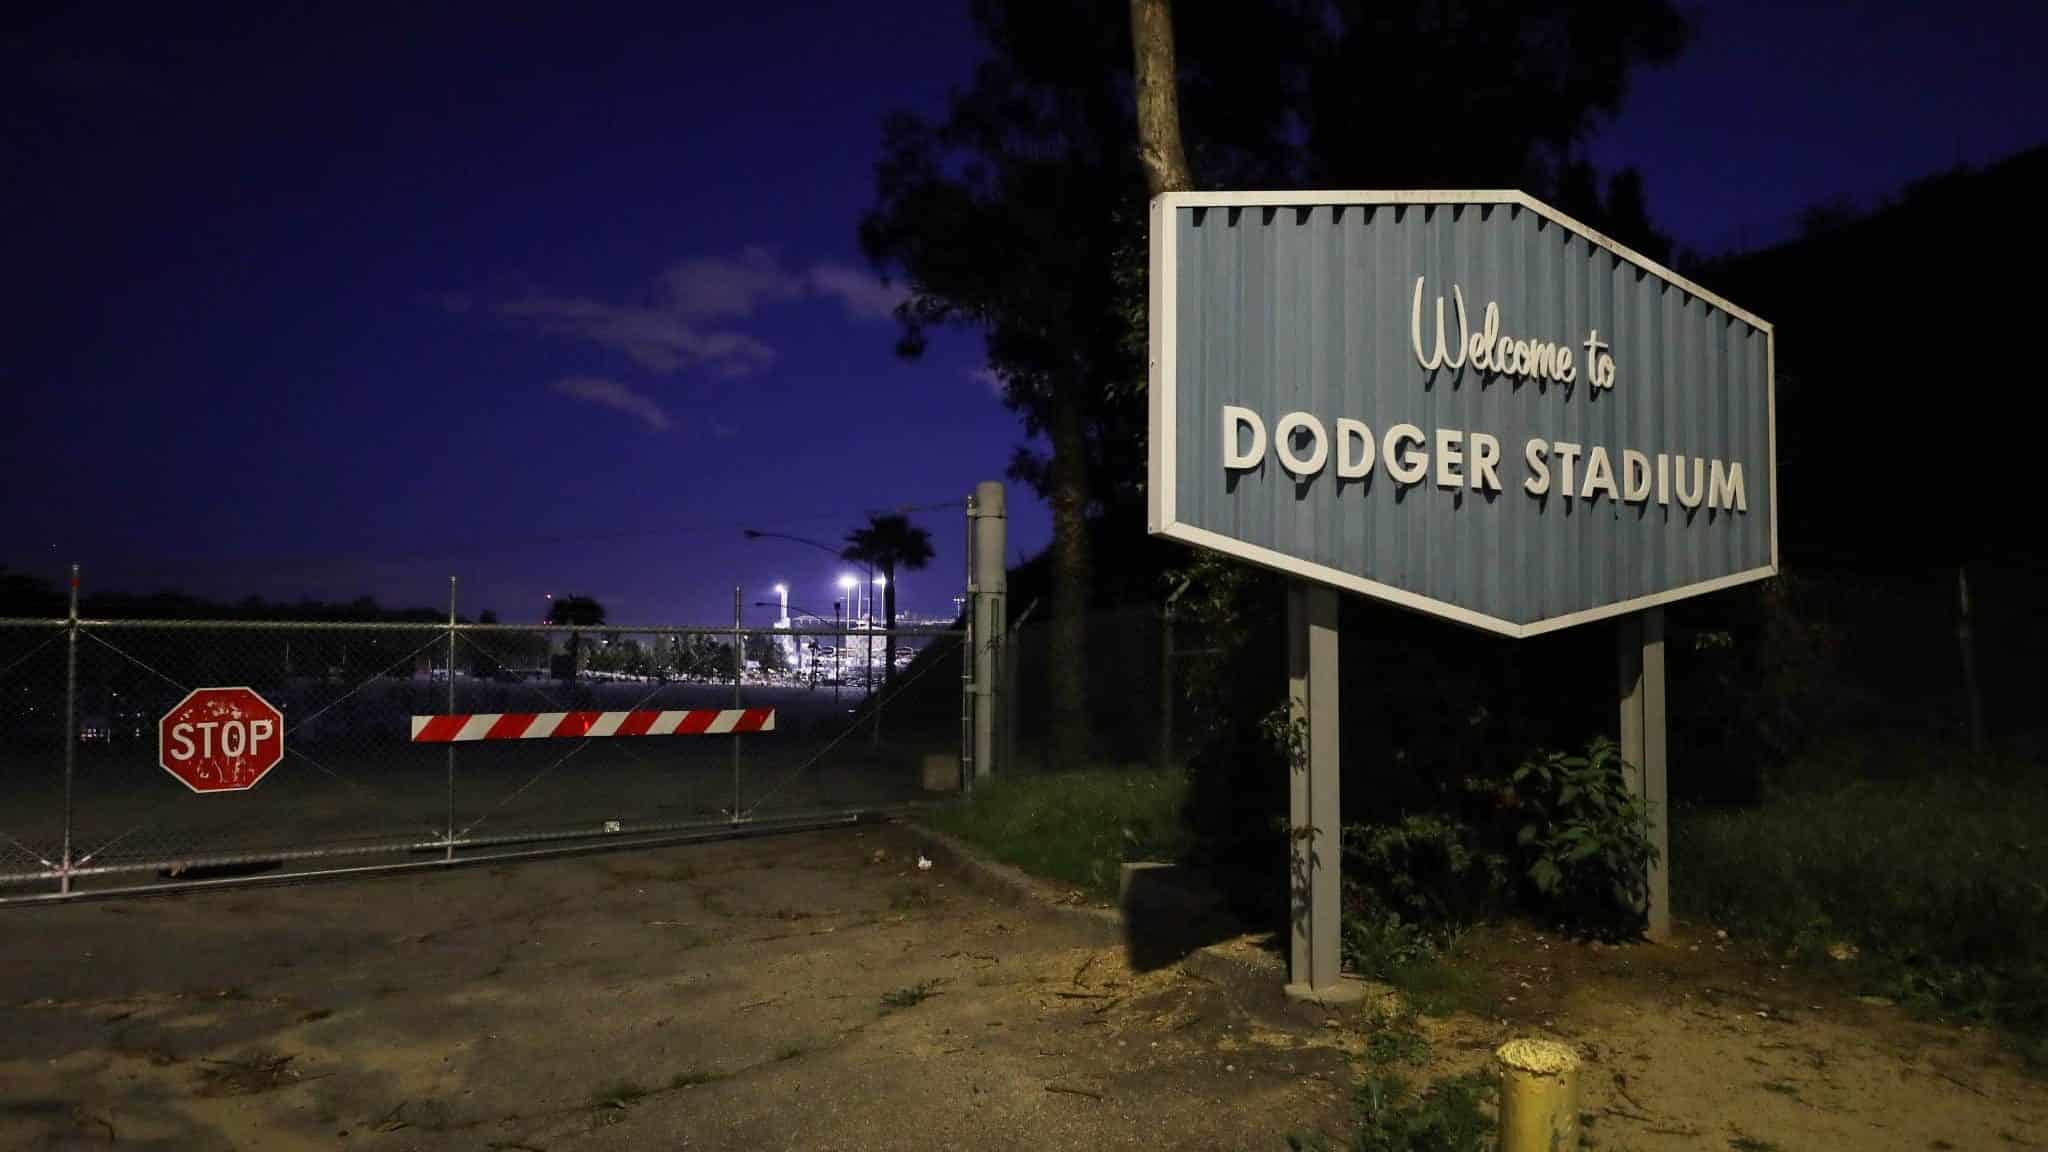 LOS ANGELES, CALIFORNIA - MARCH 26: A sign for Dodger Stadium stands next to a locked gate on what was supposed to be Major League Baseball's opening day, now postponed due to the coronavirus, on March 26, 2020 in Los Angeles, California. The Los Angeles Dodgers were slated to play against the San Francisco Giants at the stadium today. Major League Baseball Commissioner Rob Manfred recently said the league is 